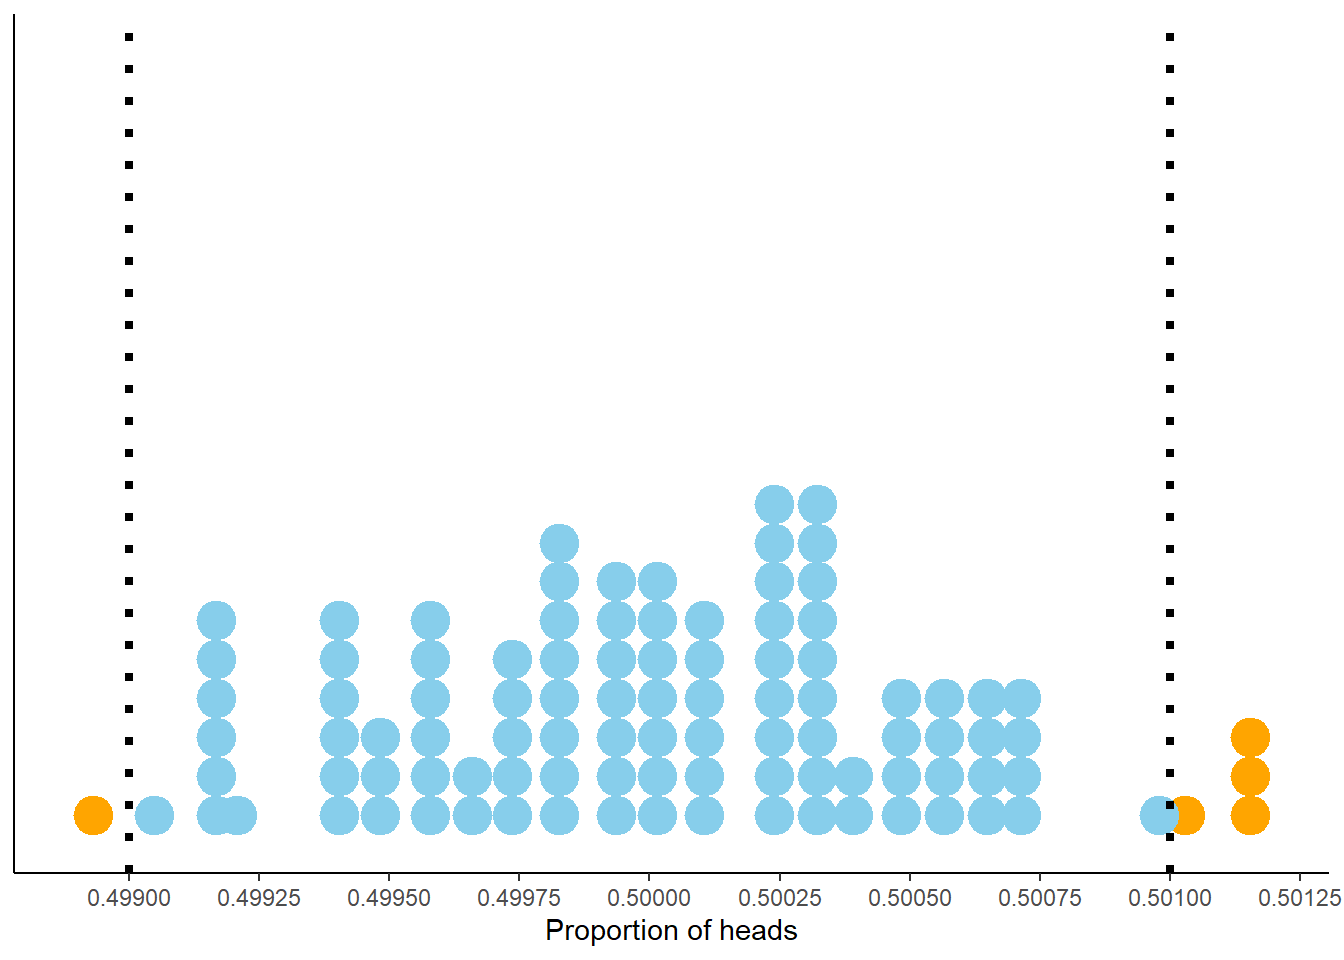 Proportion of flips which are heads in 100 sets of 1,000,000 fair coin flips. Each dot represents a set of 1,000,000 fair coin flips. In 95 of these 100 sets the proportion of heads is between 0.499 and 0.501 (the blue dots).